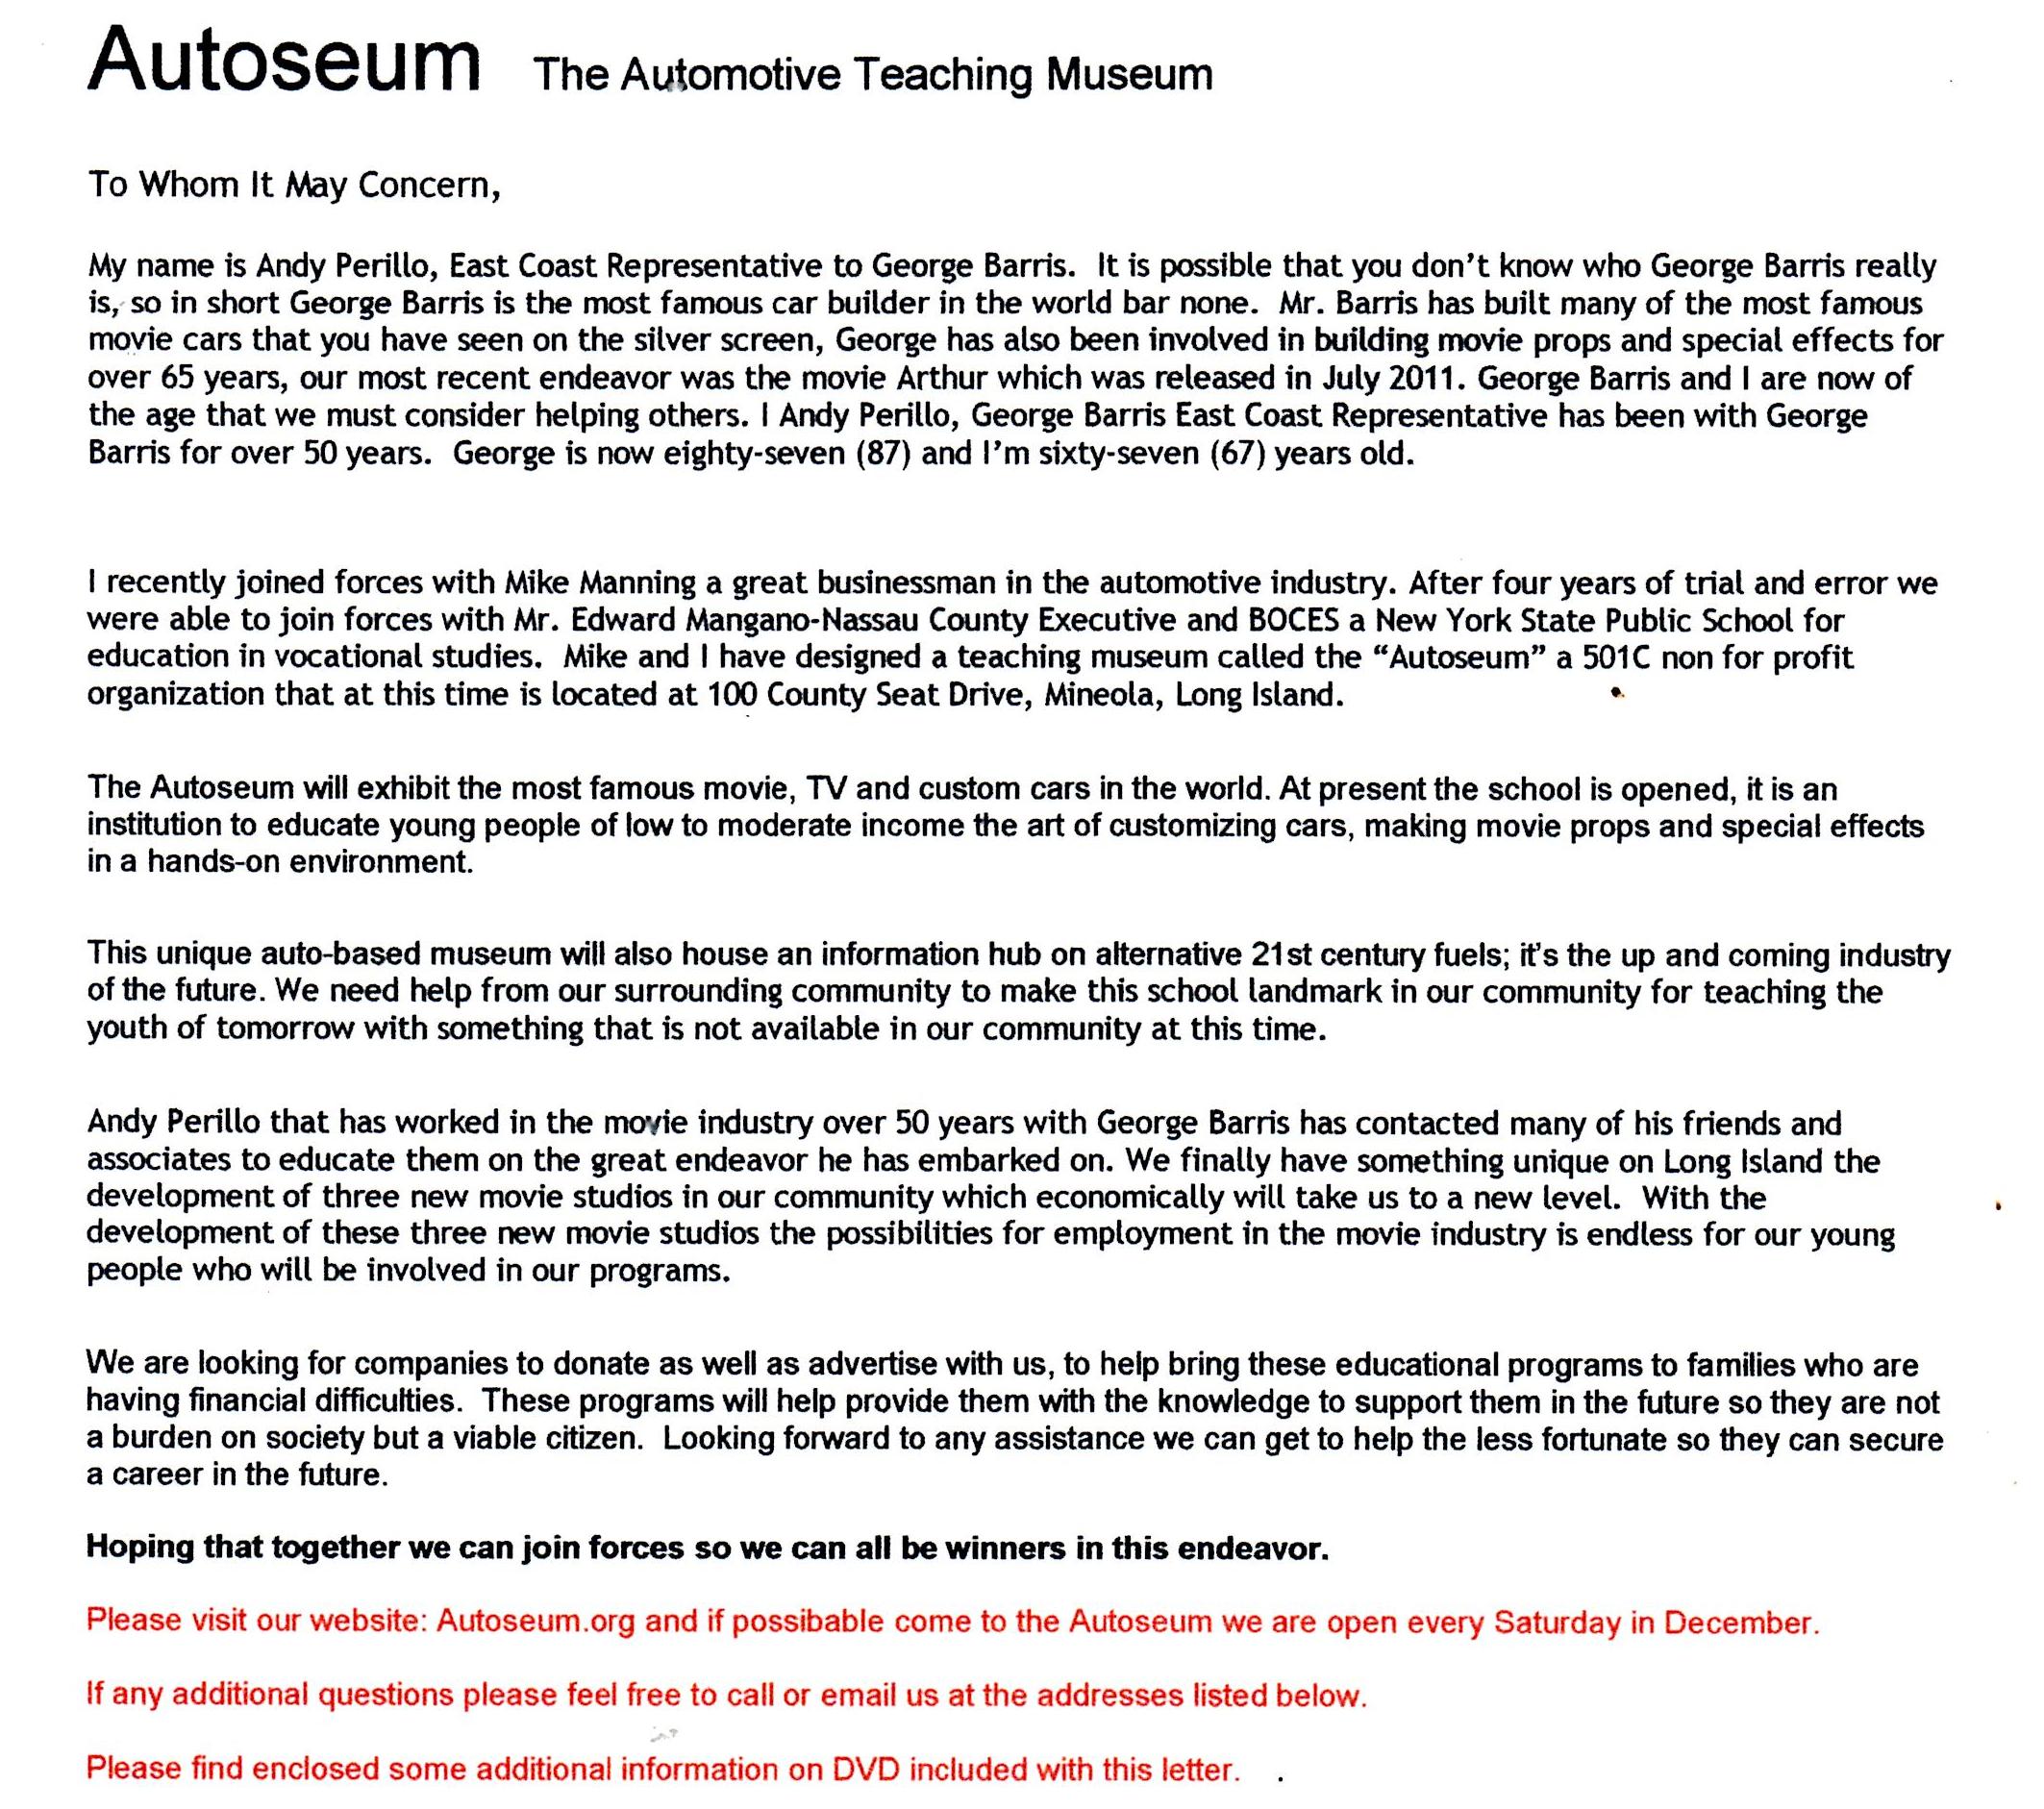 Information about a museum that we have. Its called the Autoseum, its an automotive teaching museum where you can come and learn how to build custom and movie cars and props and special effects